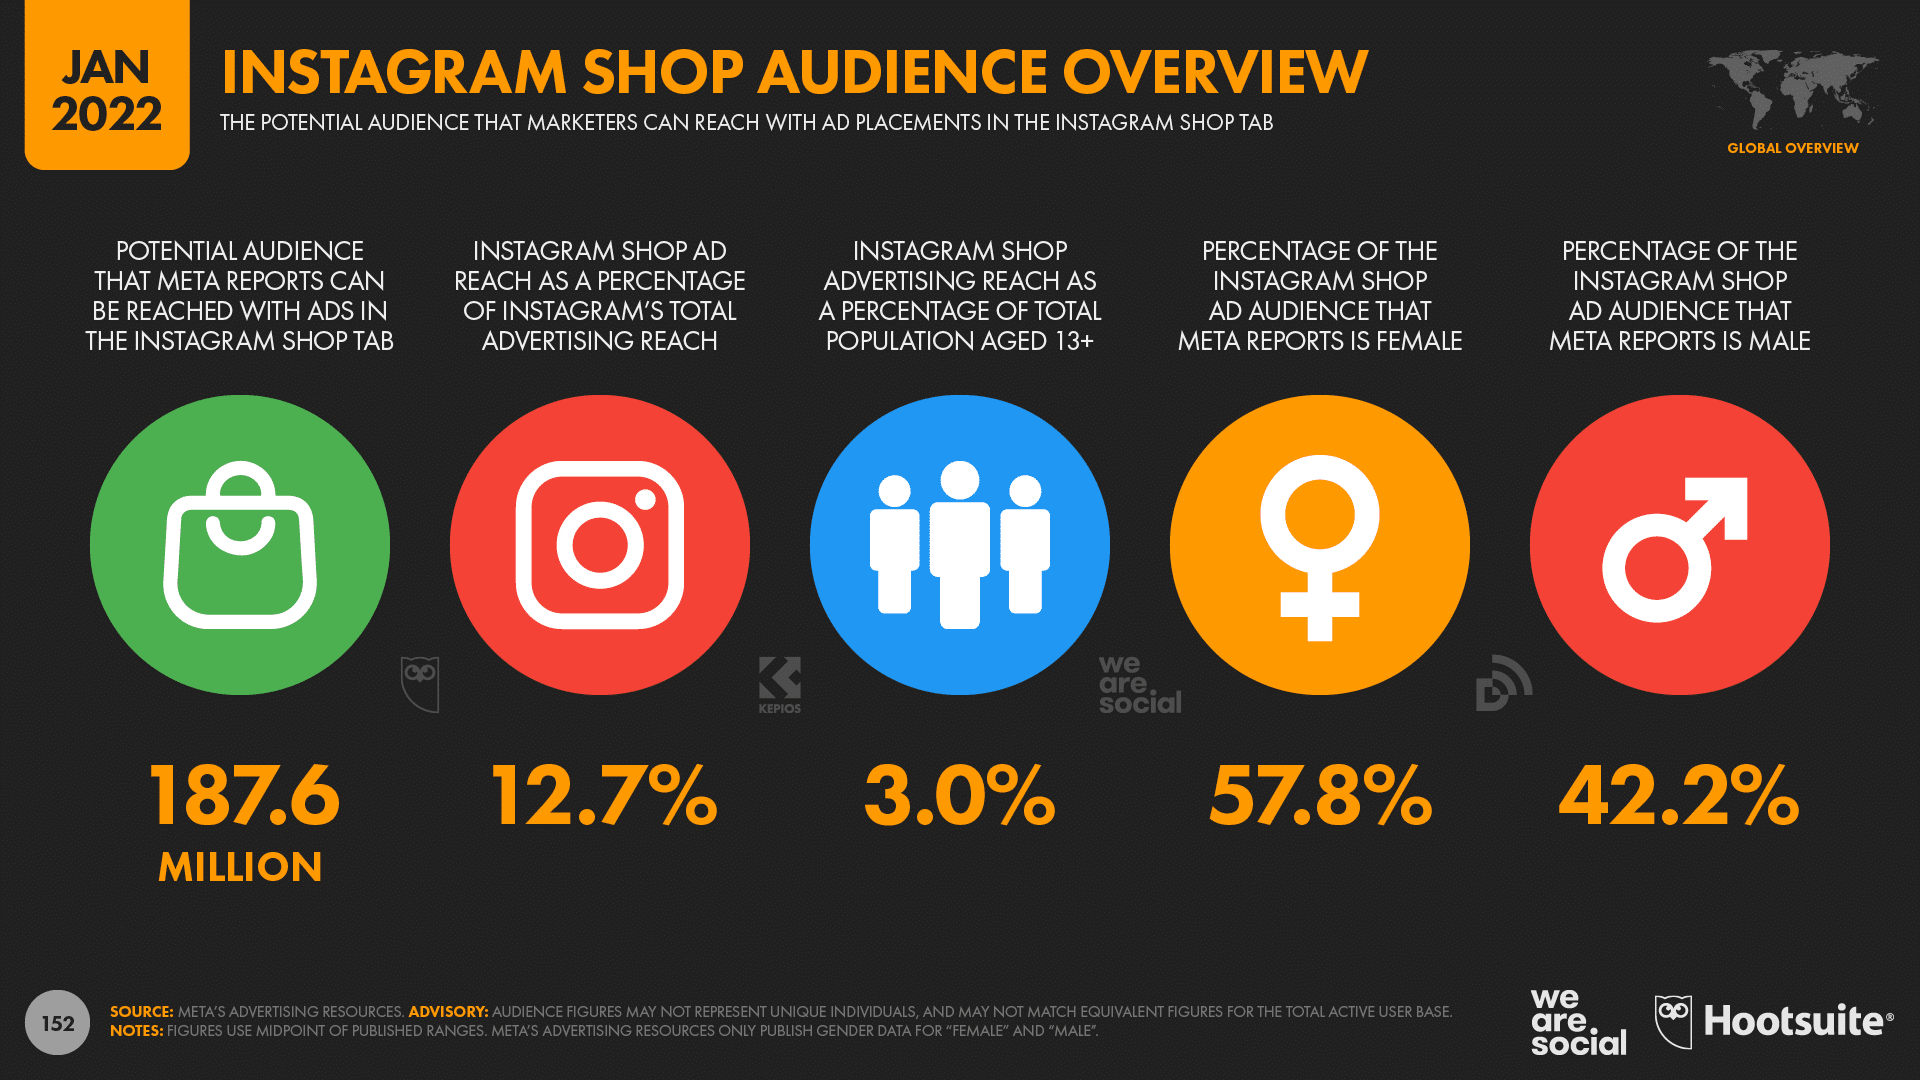 chart showing Instagram Shop audience overview